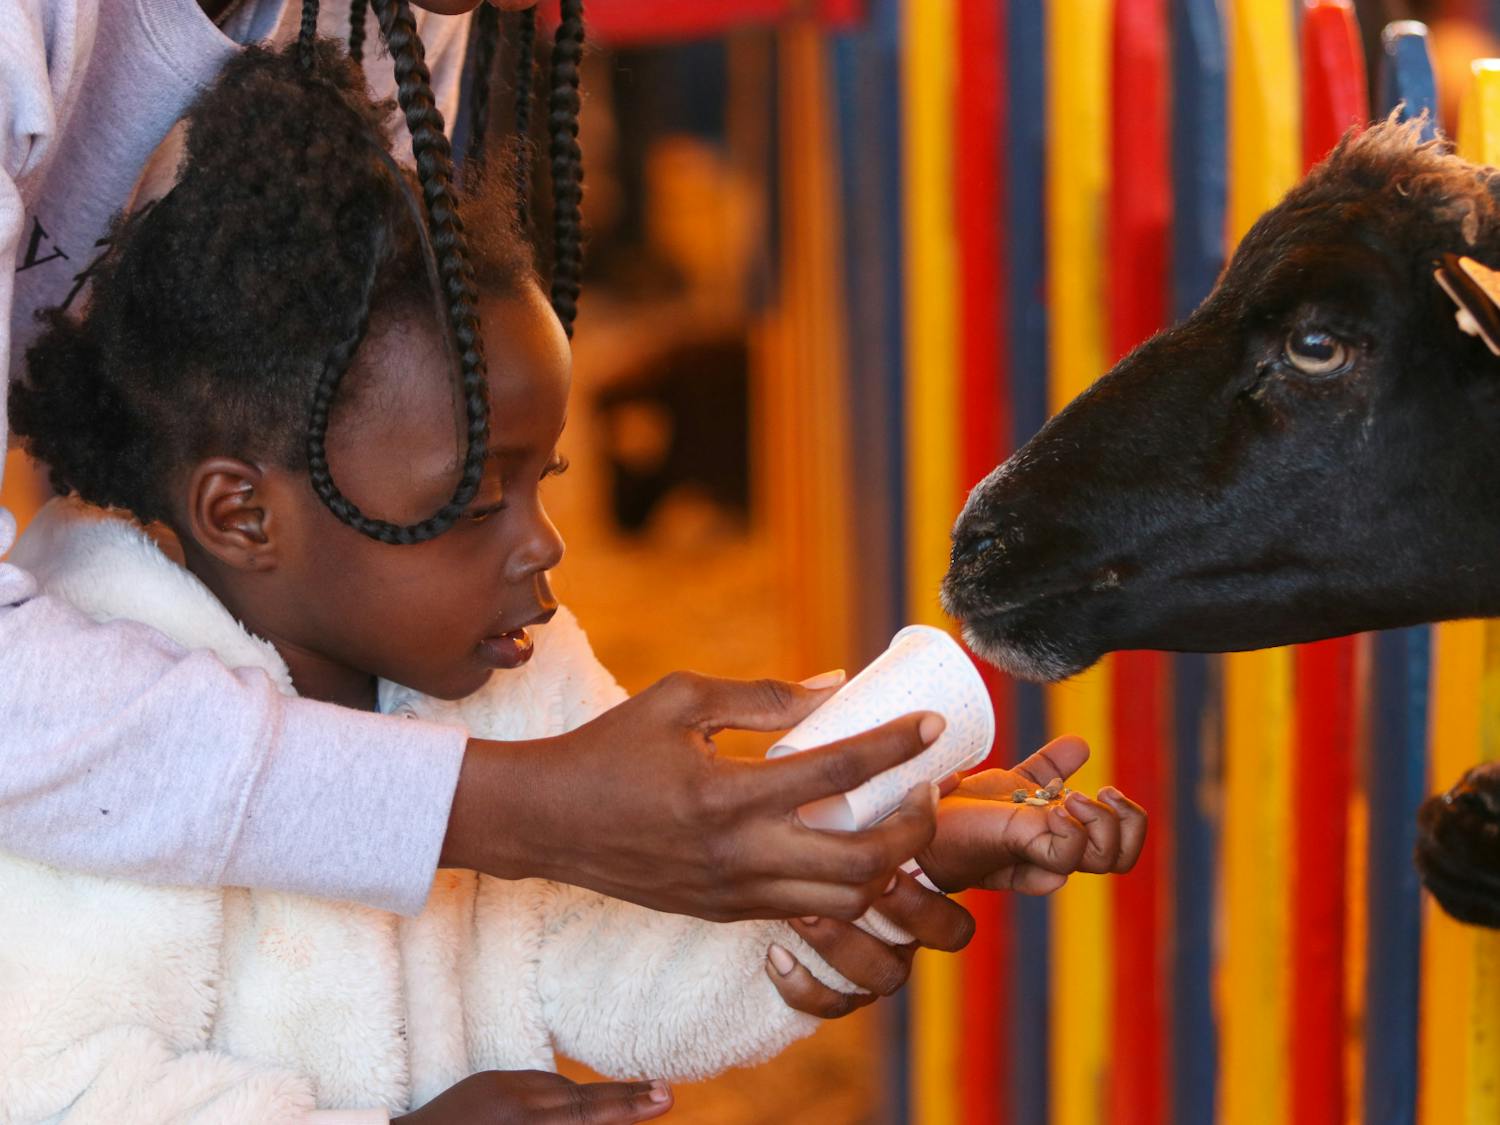 The little girl, Kali, is guided by her mother, Baray, in feeding the animals beyond the fence at the South Carolina State Fair petting zoo on Oct. 18, 2022. The petting zoo provides animals like goats and camels for fair attendees to feed and interact with.&nbsp;